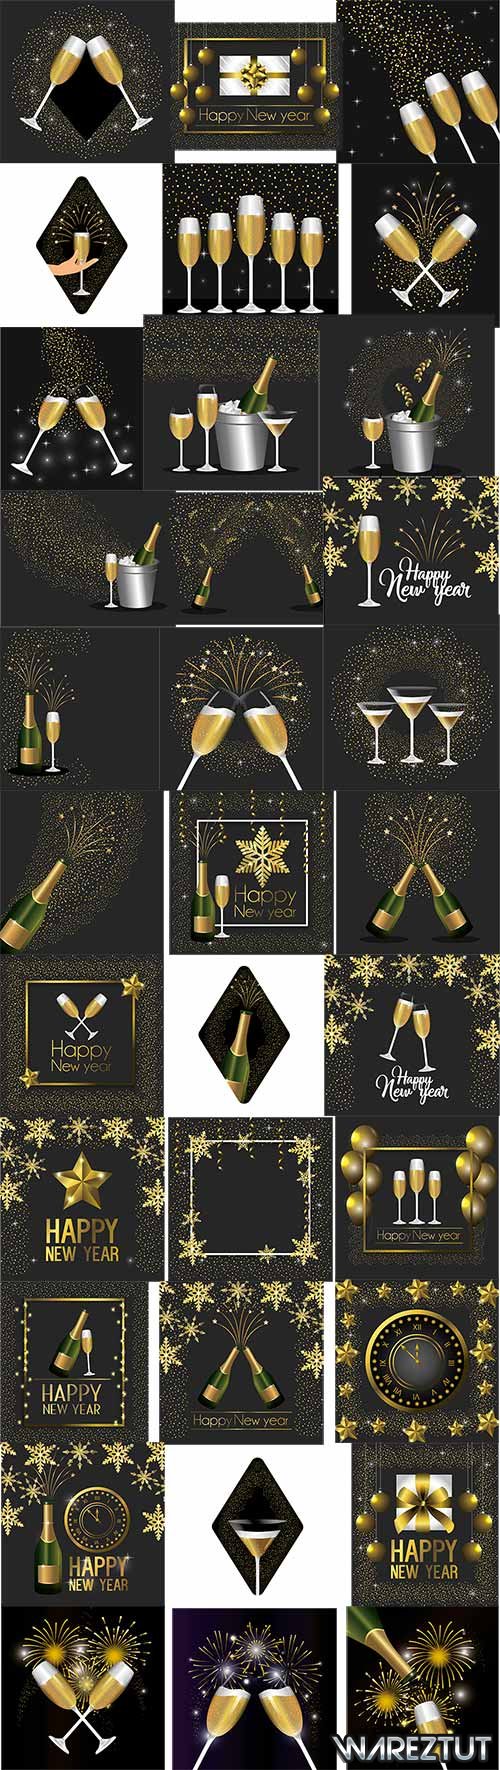 New Year elements in vector